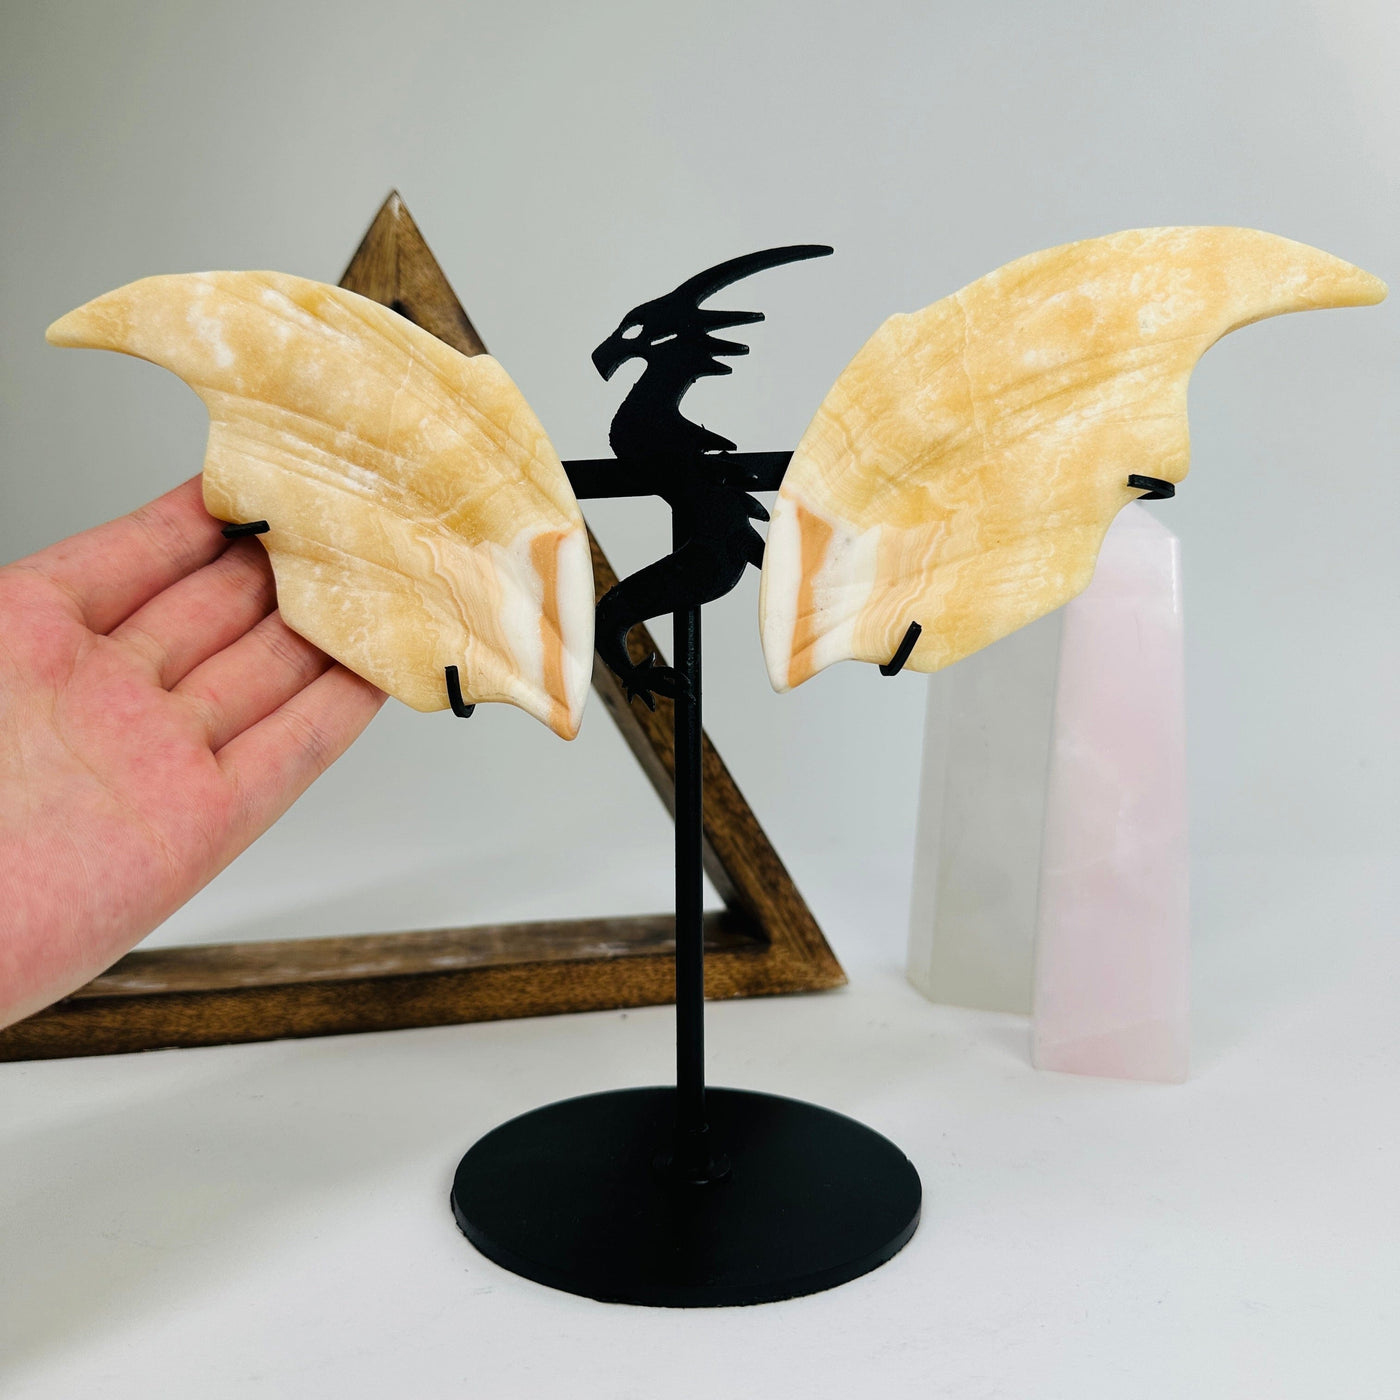 hand next to orange calcite dragon on metal stand with decorations in the background